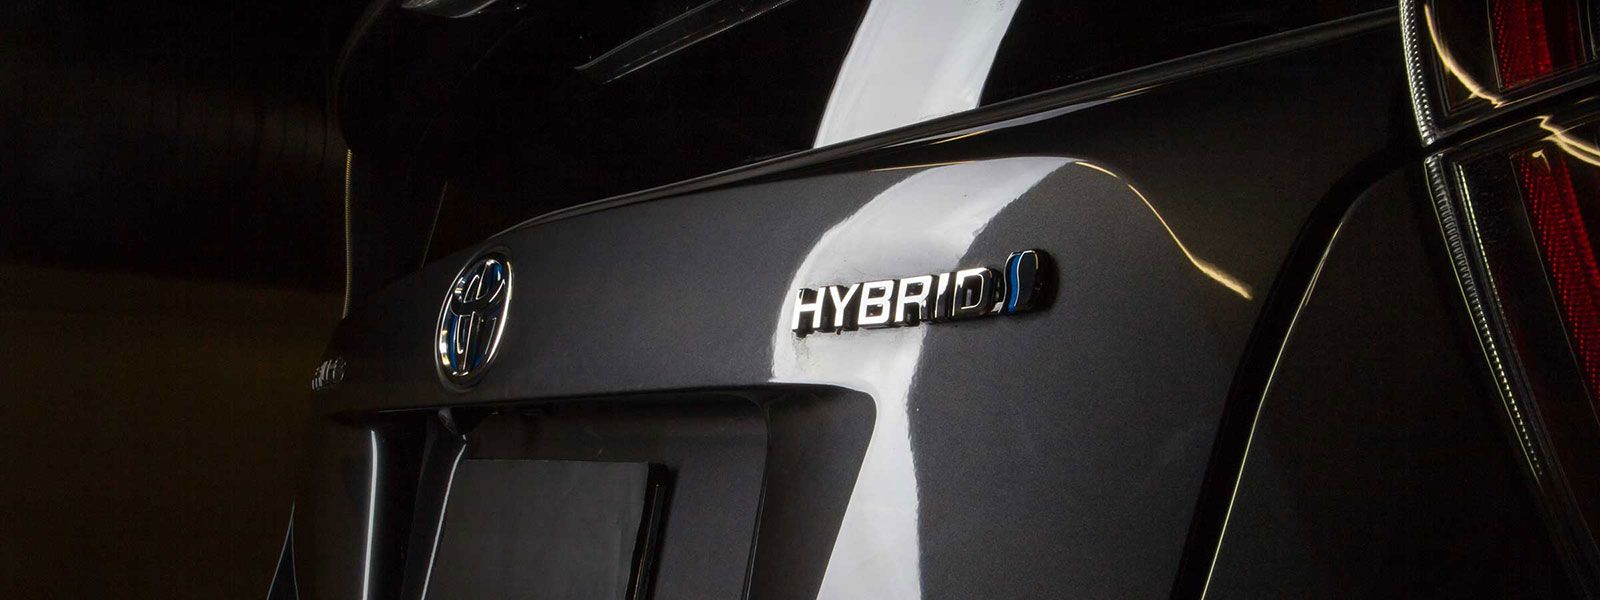 Hybrid, Plug-In Hybrid, Electric Vehicle: What's the Difference?